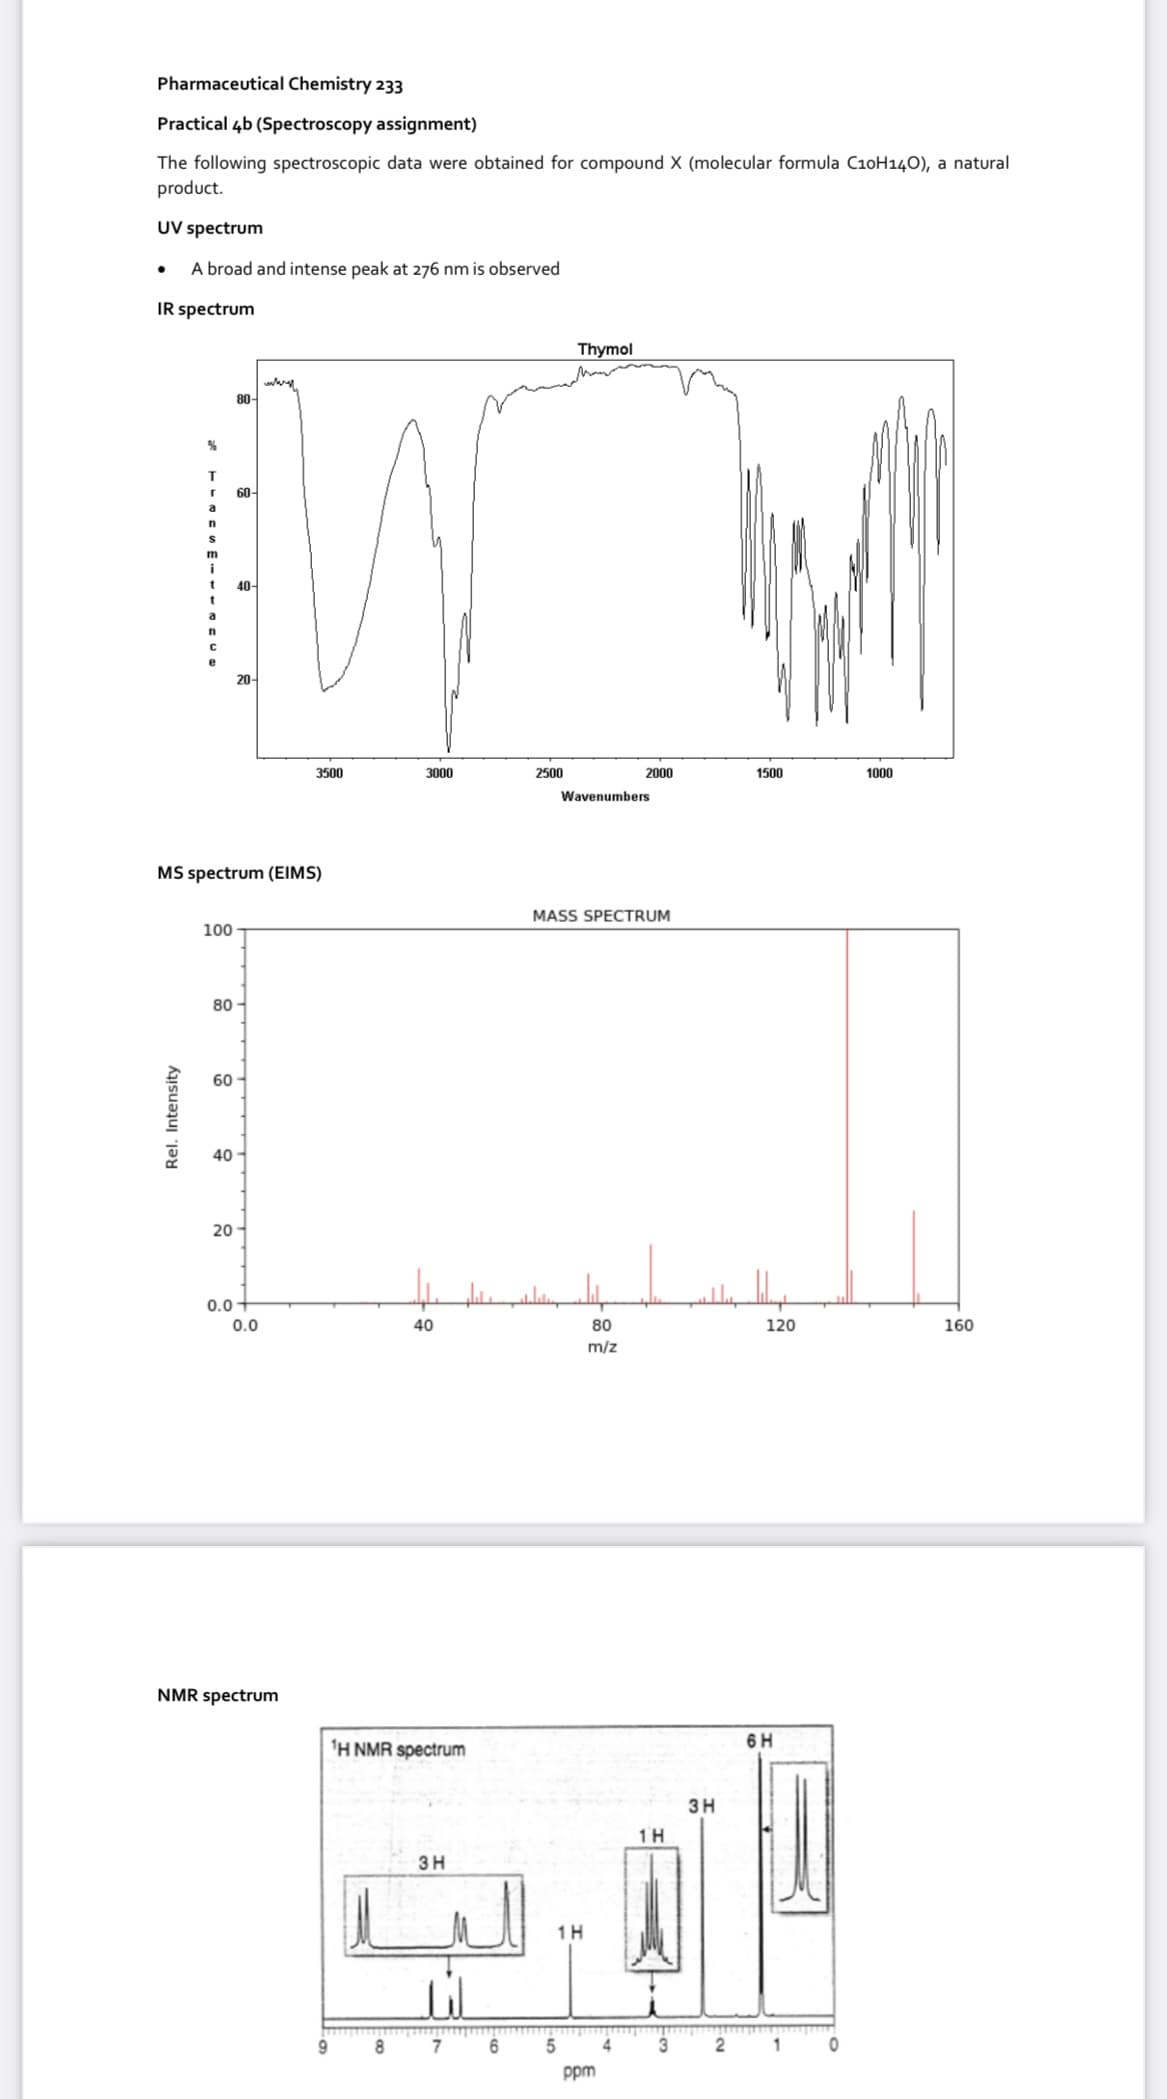 Pharmaceutical Chemistry 233
Practical 4b (Spectroscopy assignment)
The following spectroscopic data were obtained for compound X (molecular formula C10H140), a natural
product.
UV spectrum
A broad and intense peak at 276 nm is observed
IR spectrum
Thymol
80
T
60
m
i
40-
20-
3500
3000
2500
2000
1500
1000
Wavenumbers
MS spectrum (EIMS)
MASS SPECTRUM
100
80
60
40
20
0.0
0.0
40
80
120
160
m/z
NMR spectrum
'H NMR spectrum
6 H
3H
1H
3H
1H
1
ppm
Rel. Intensity
